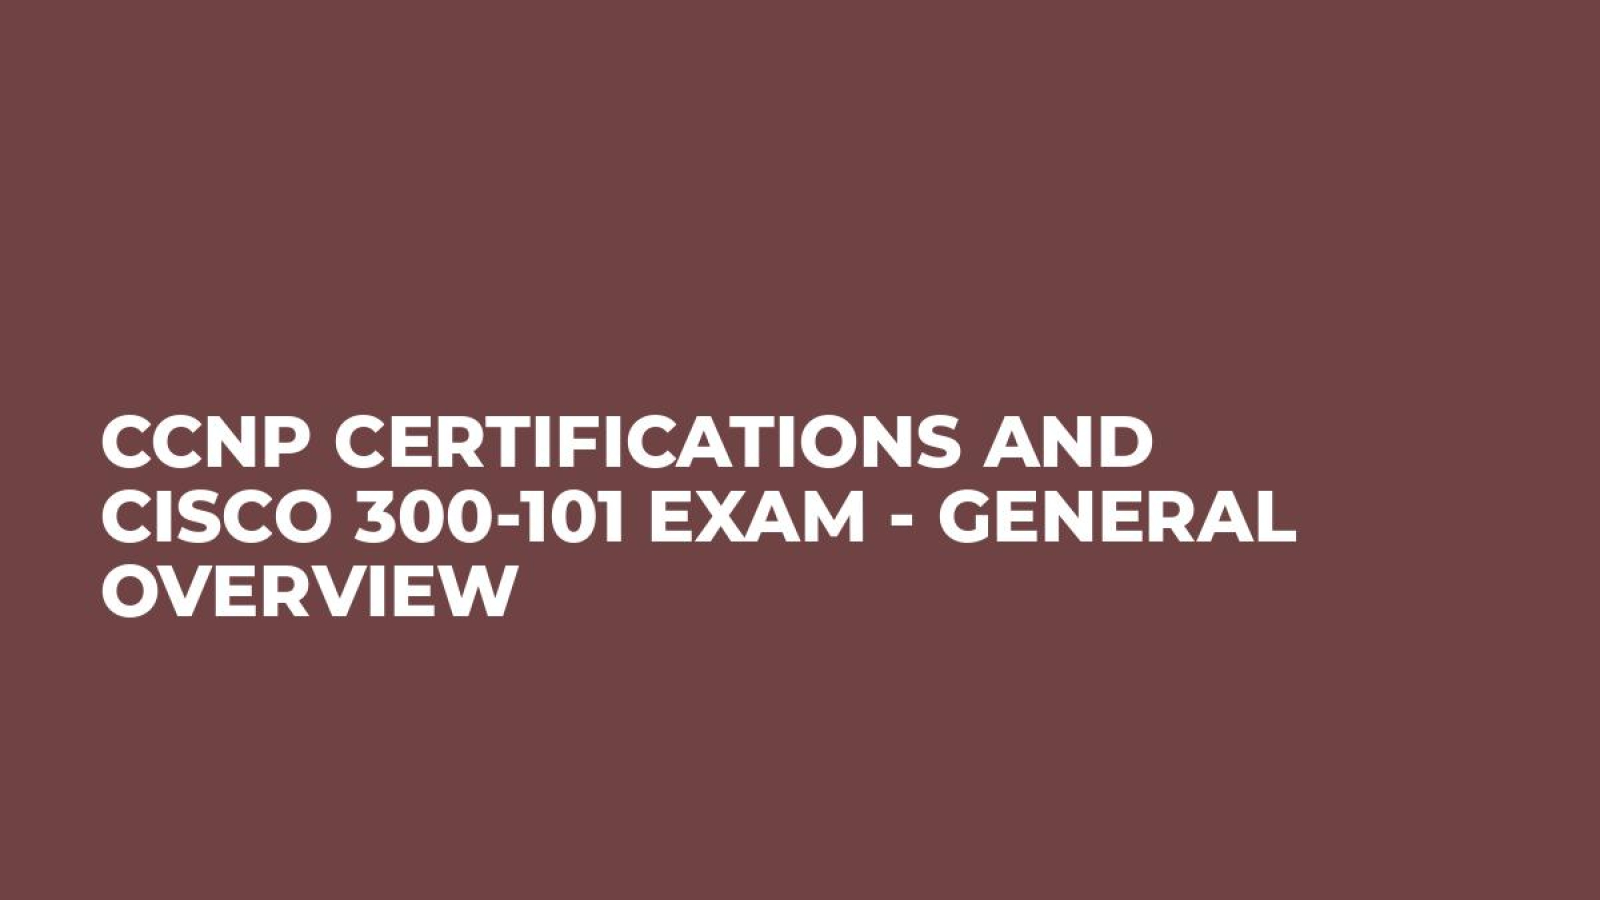 CCNP Certifications and Cisco 300-101 Exam - General Overview